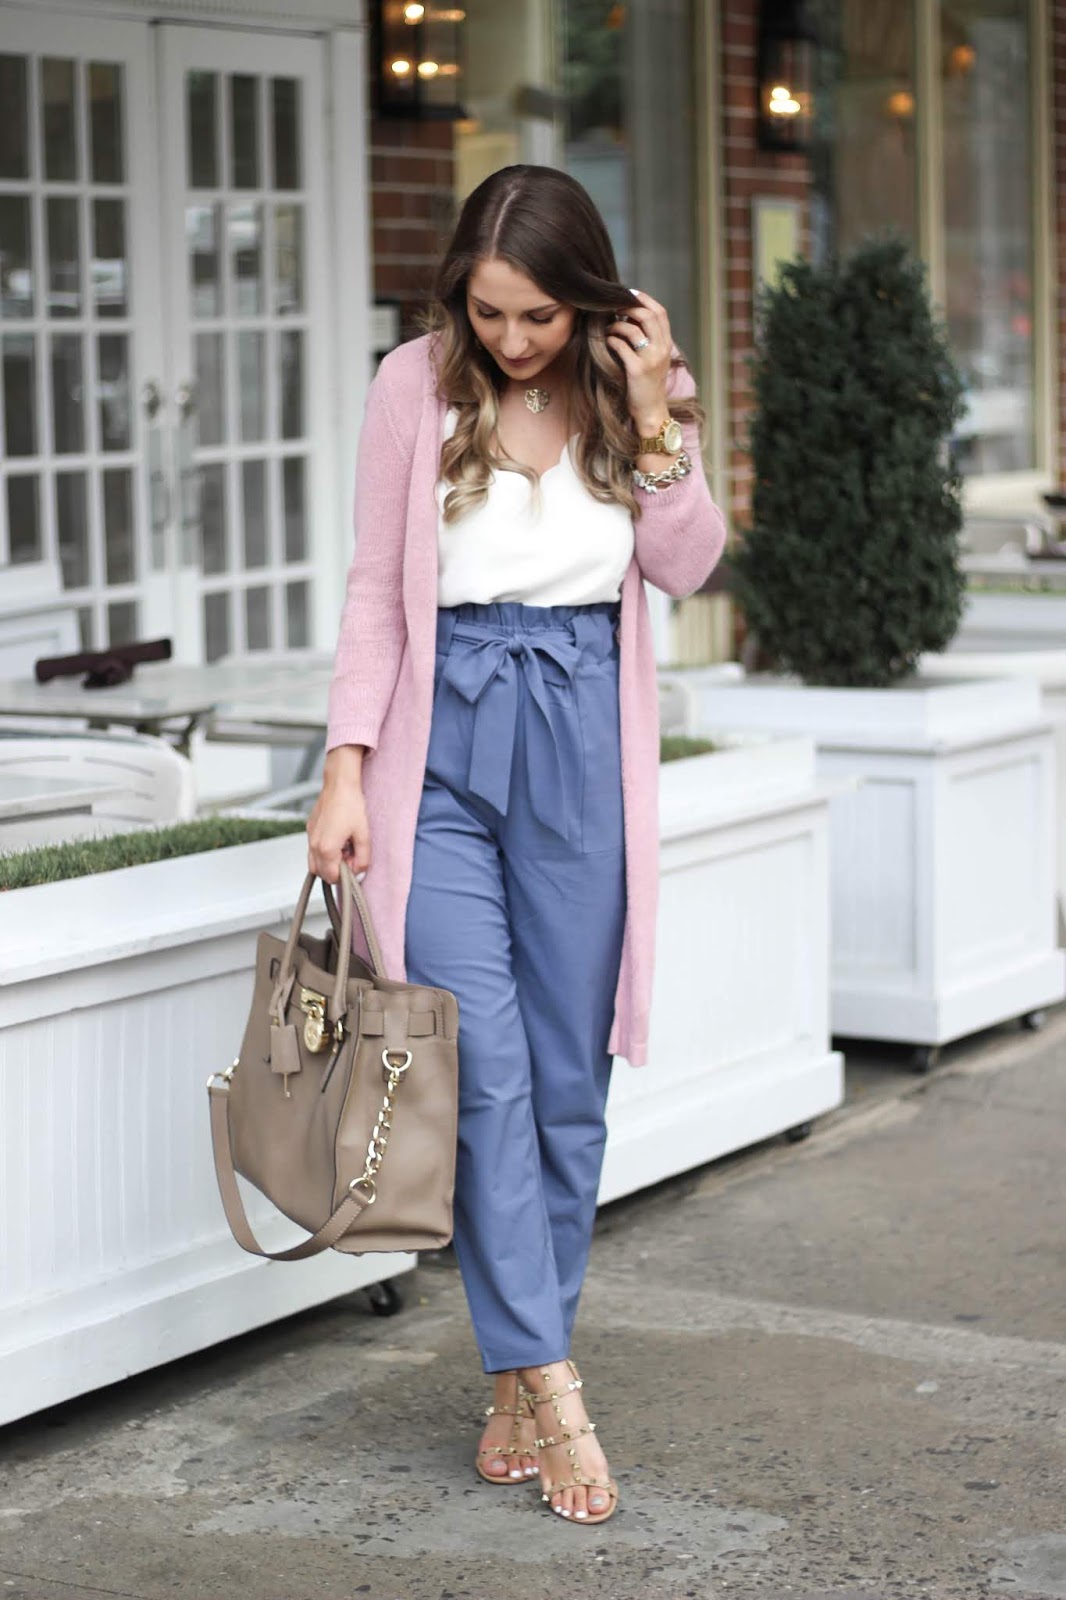 Pin on outfit5